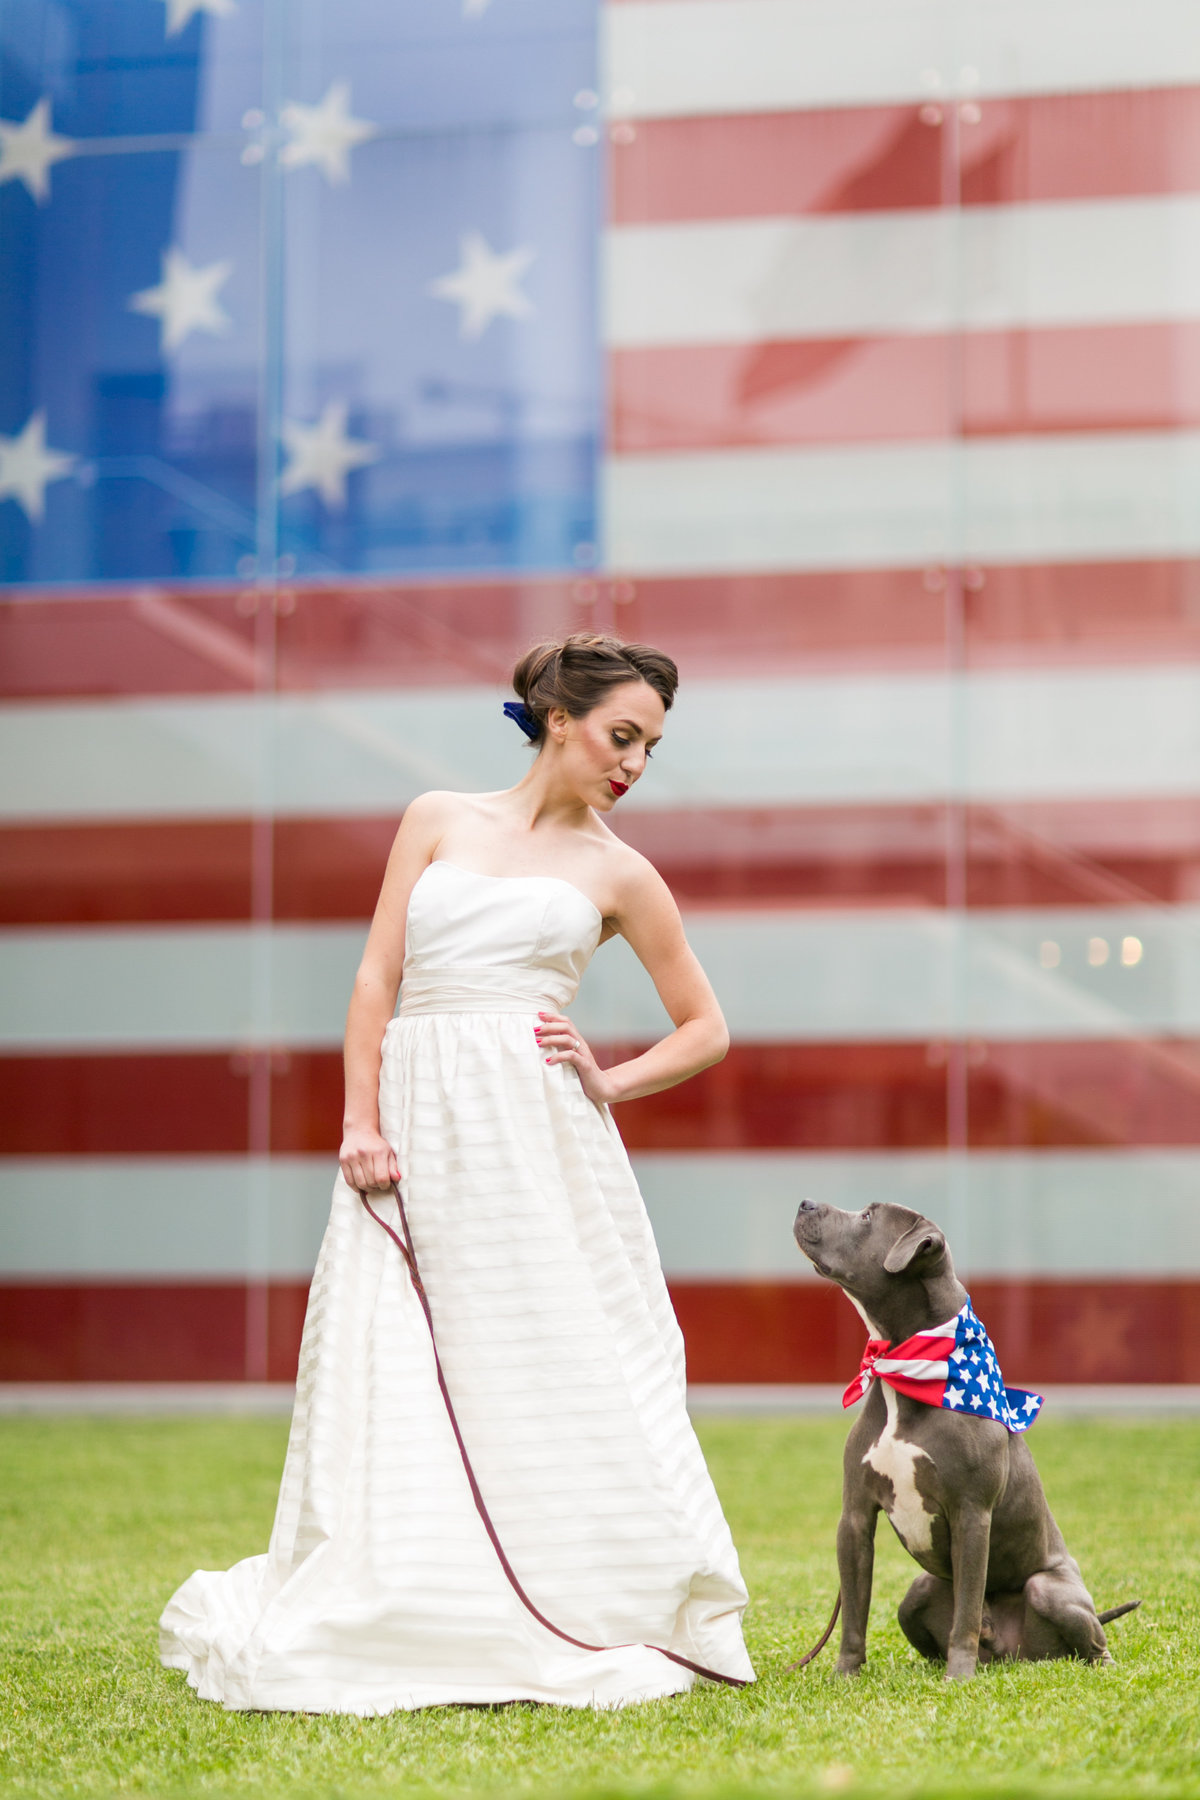 Baltimore Flag museum wedding with a blue pit bull